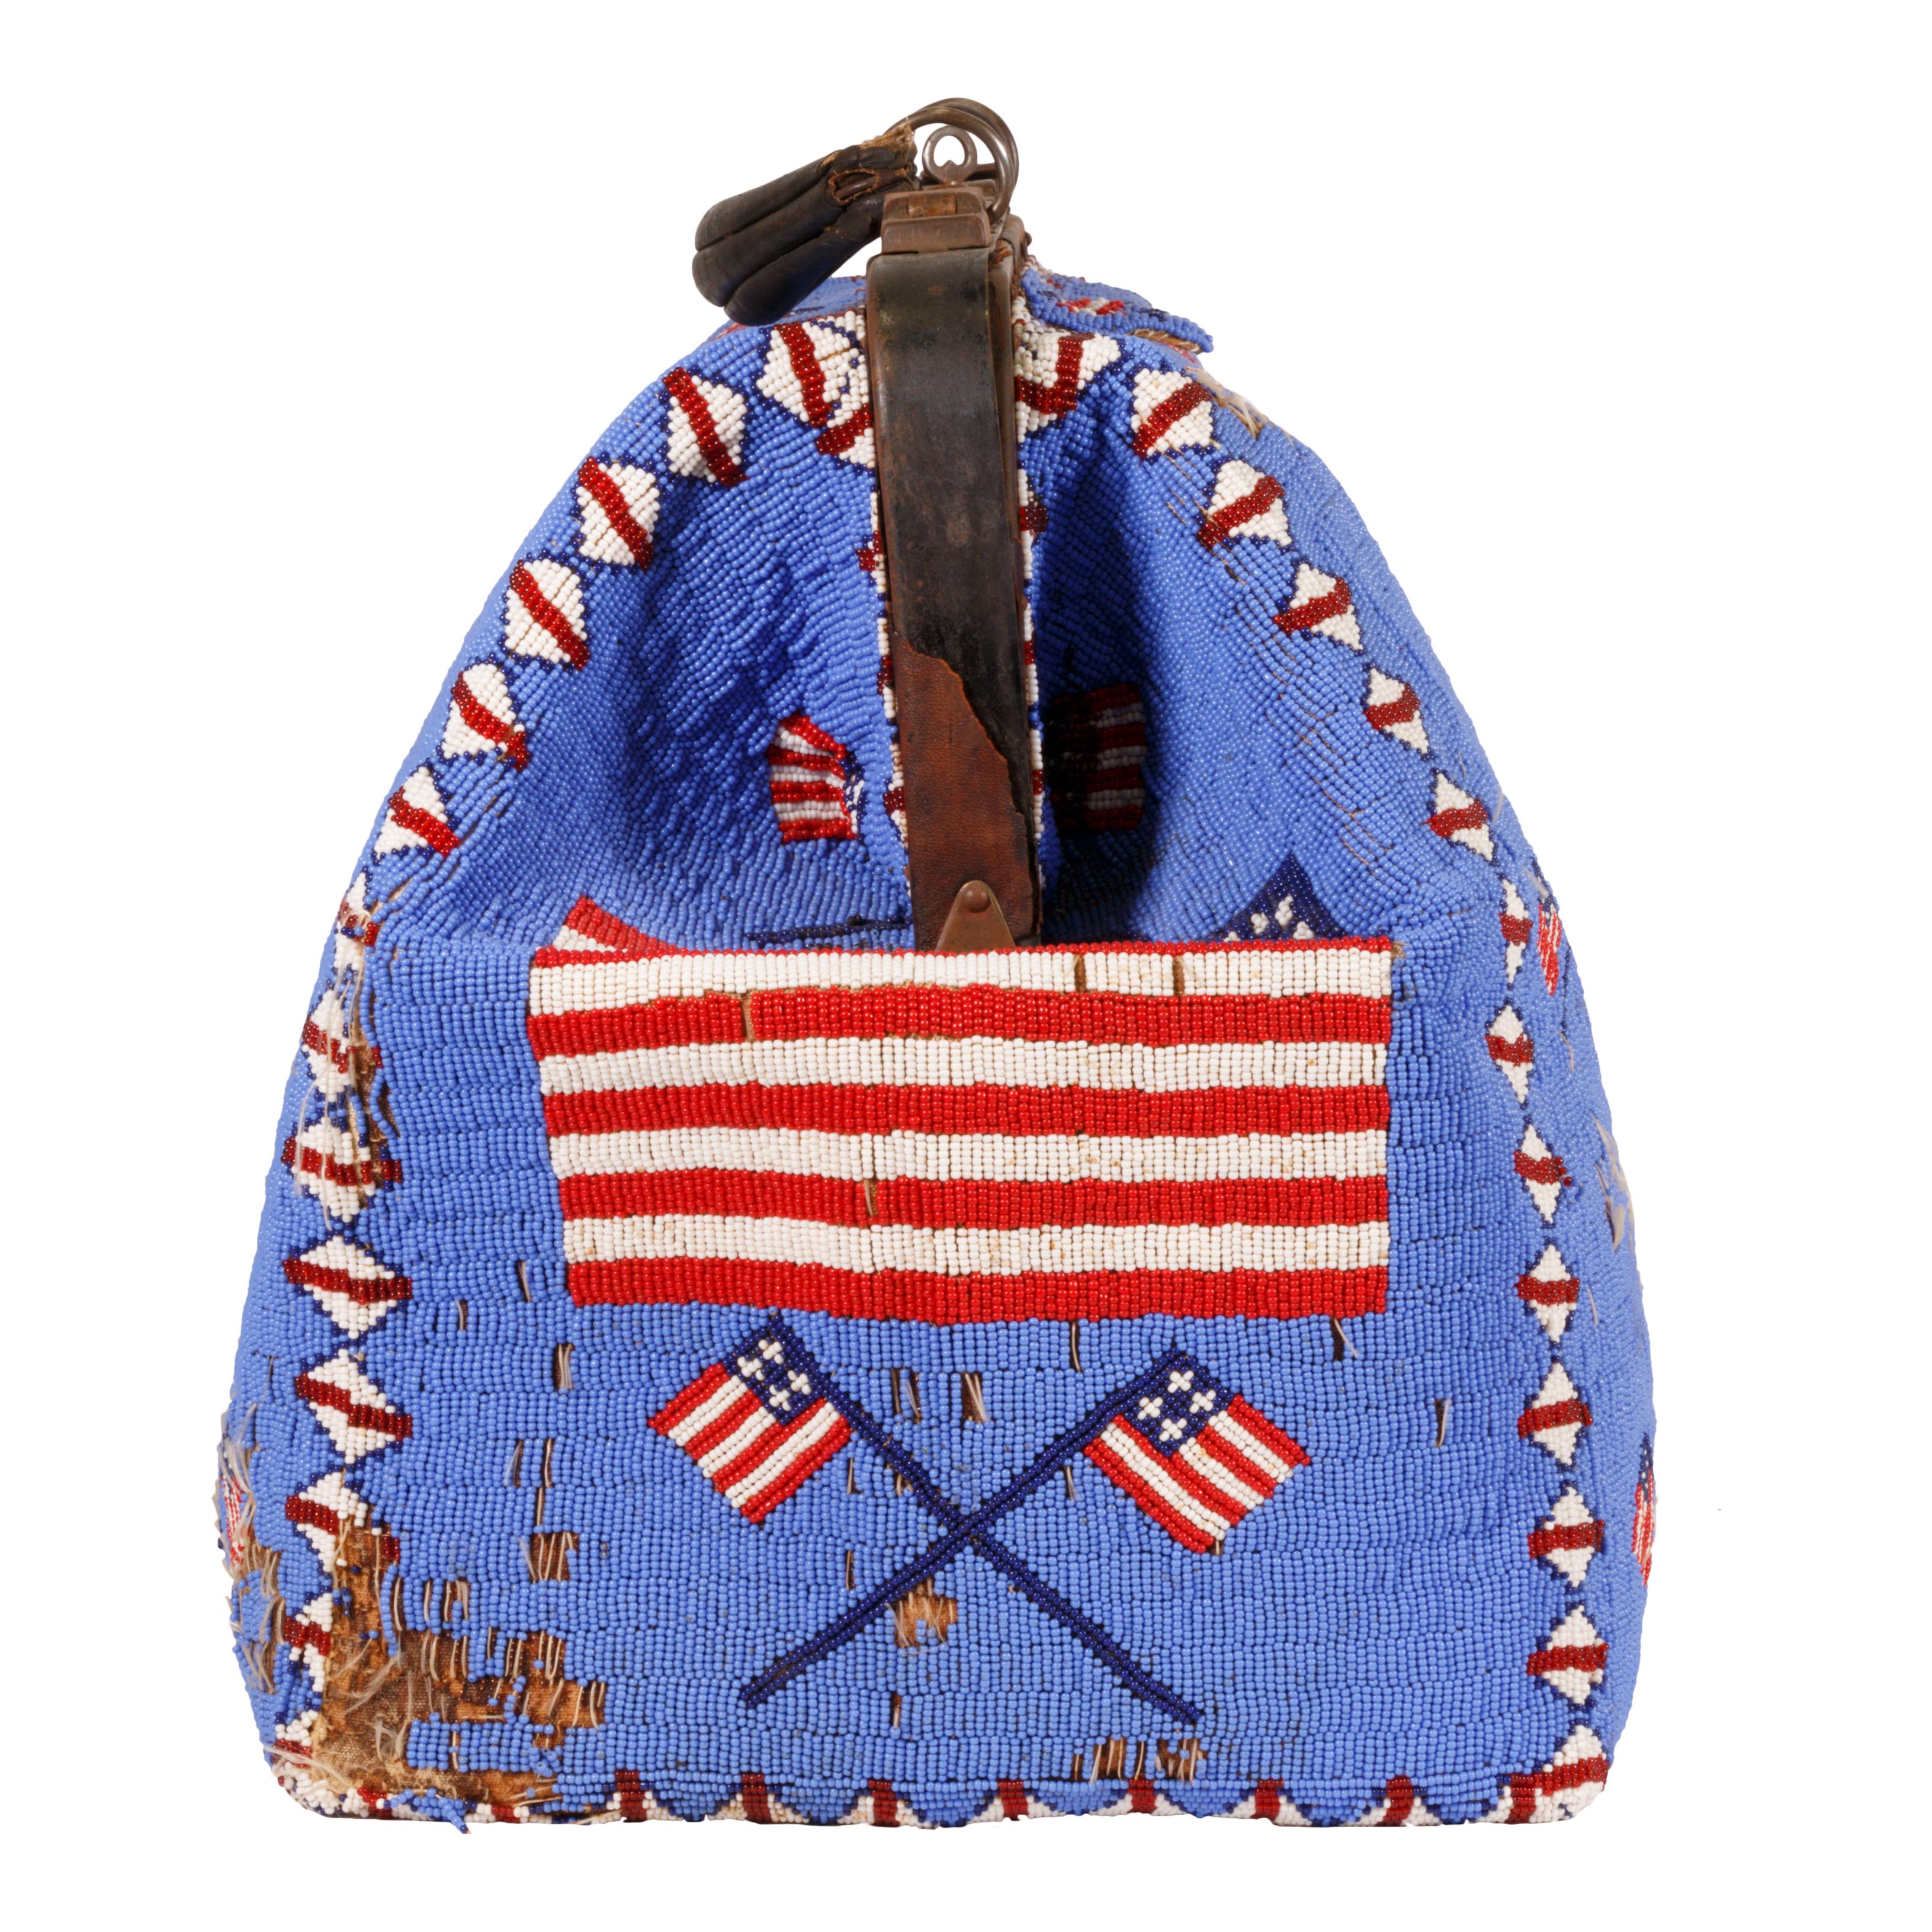 Leather Sioux Beaded Patriotic Doctor's Bag, Early 20th Century For Sale